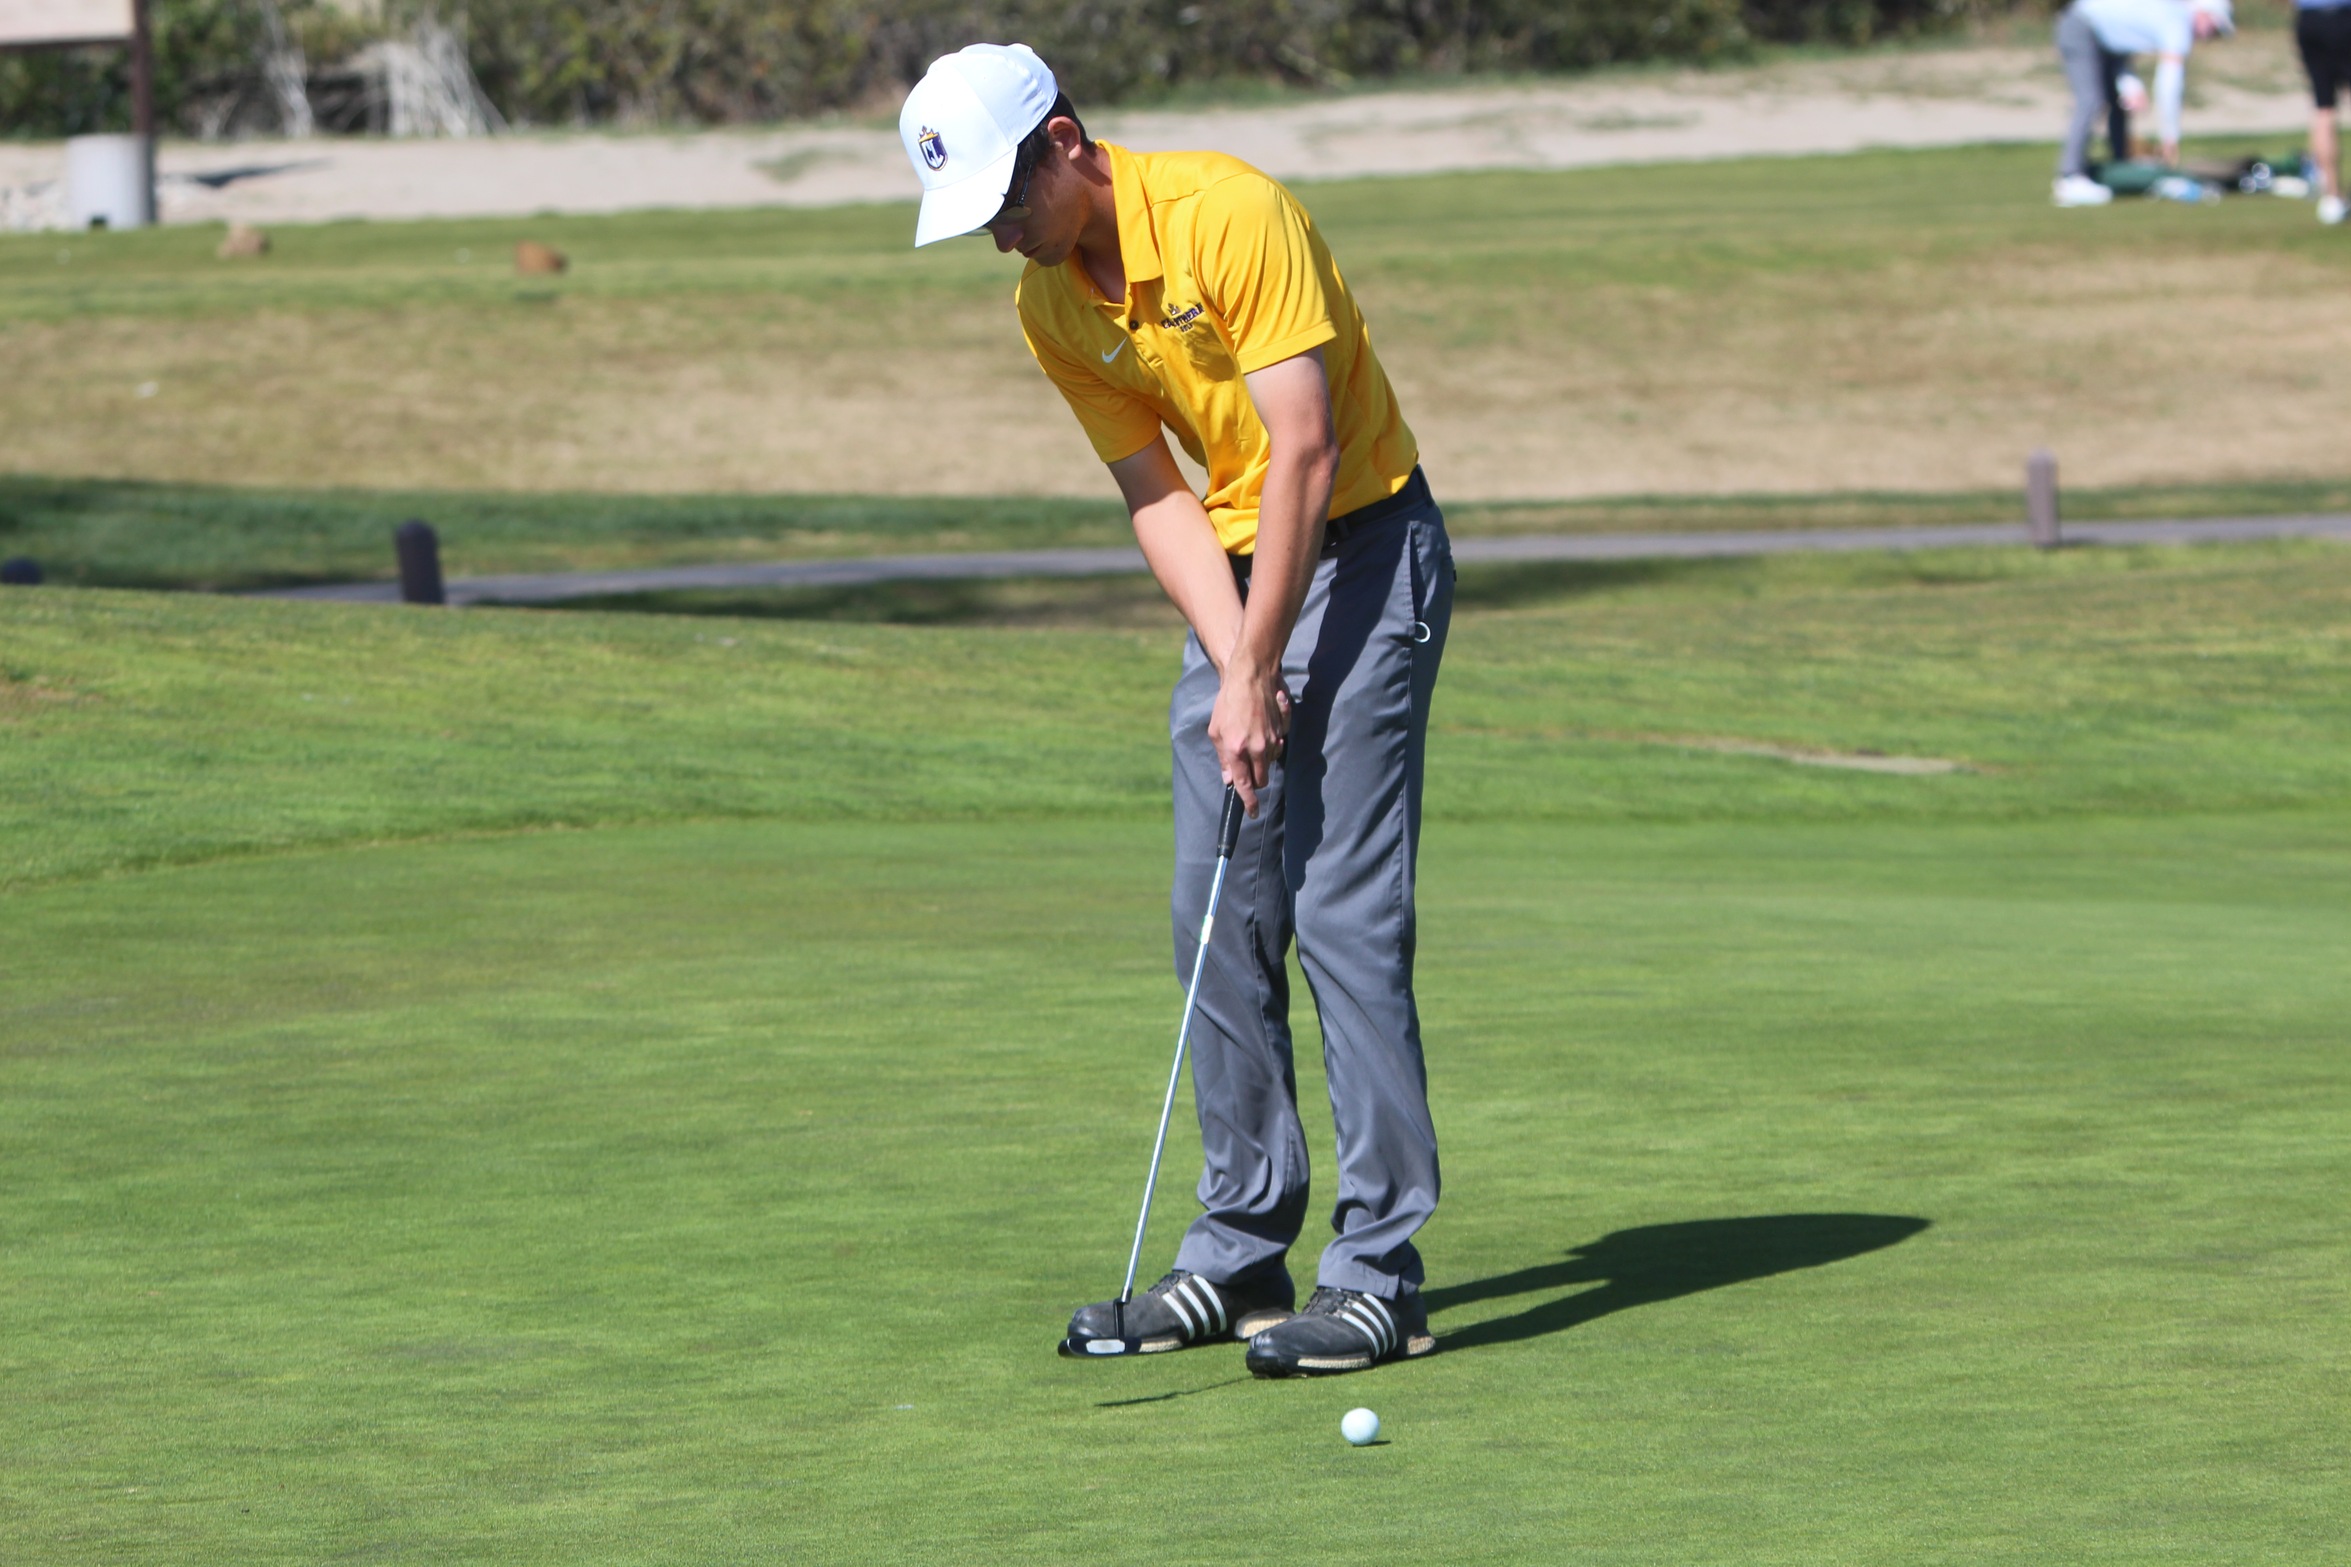 Derek Hahn placed third to lead the Kingsmen to second at SCIAC #1.